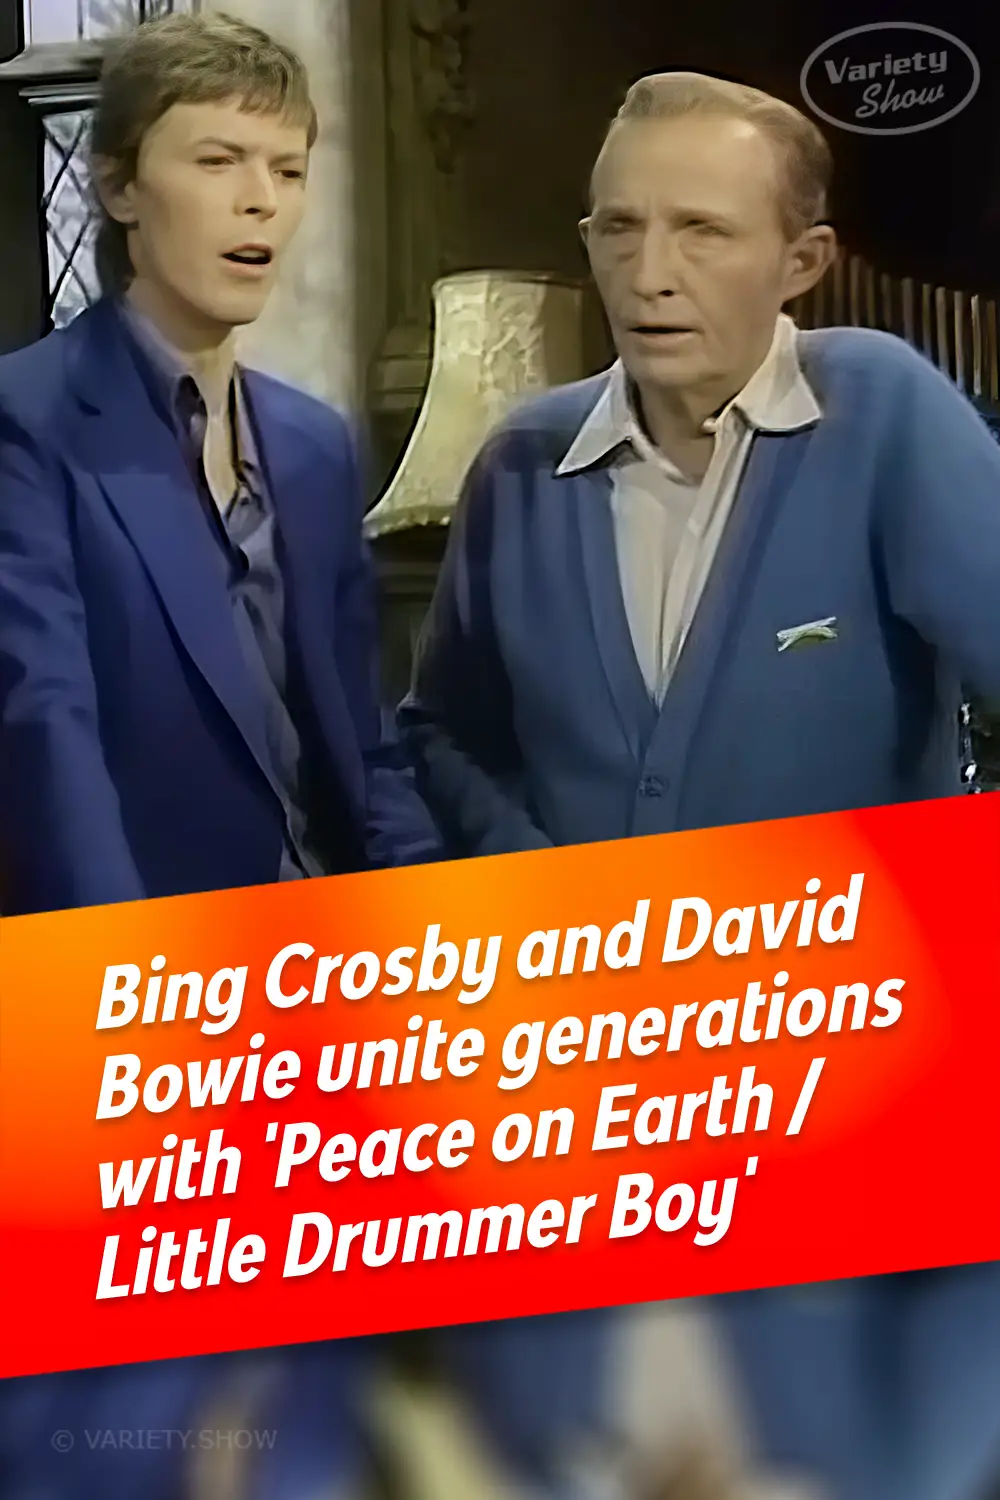 Bing Crosby and David Bowie unite generations with \'Peace on Earth/Little Drummer Boy\'